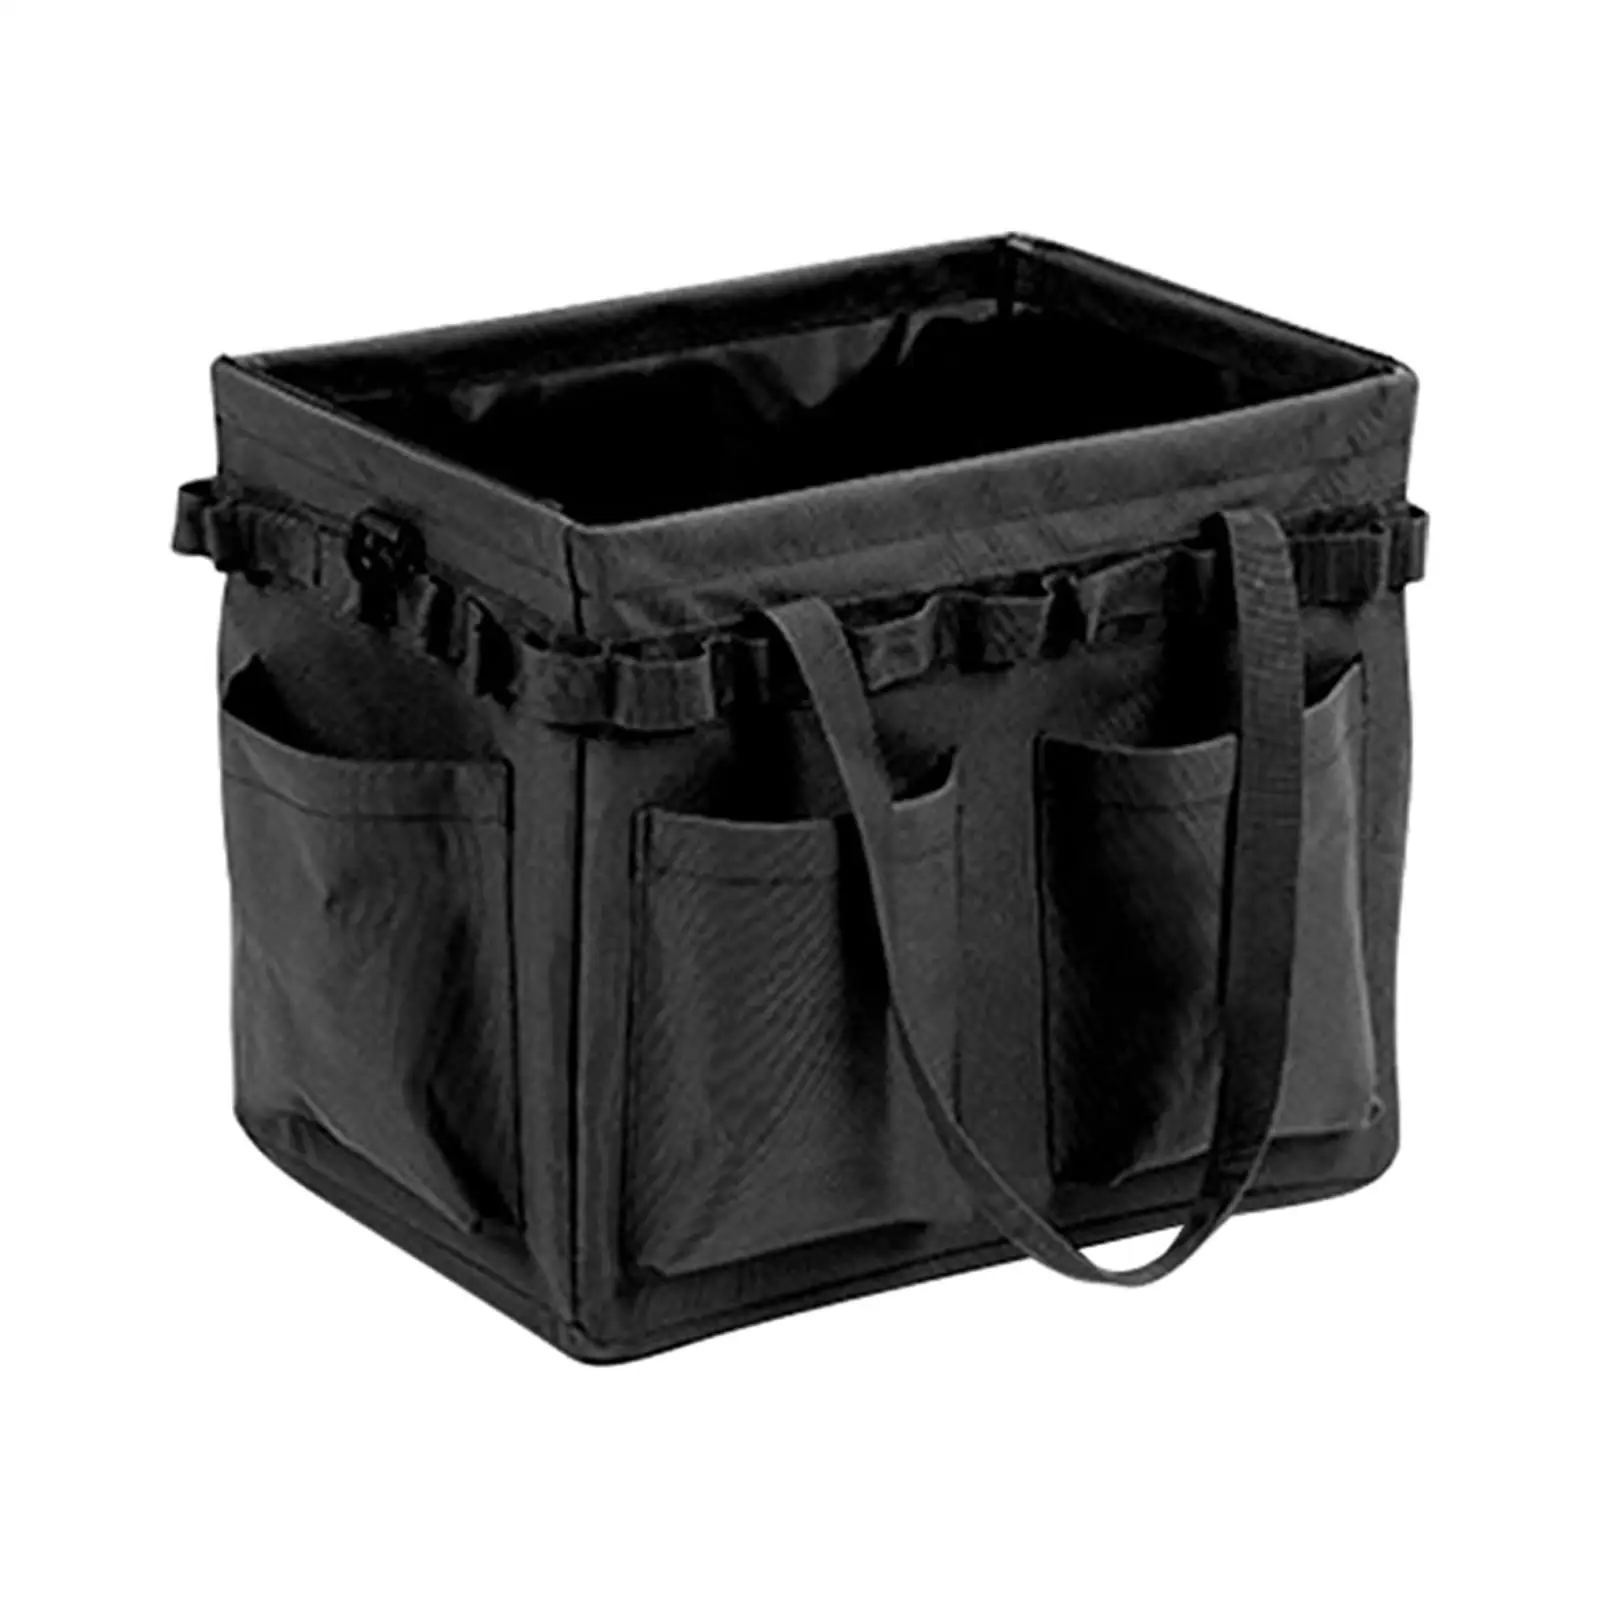 Foldable Travel Duffel Tote Utility Tote Bag Handbag Carry Basket Container Case